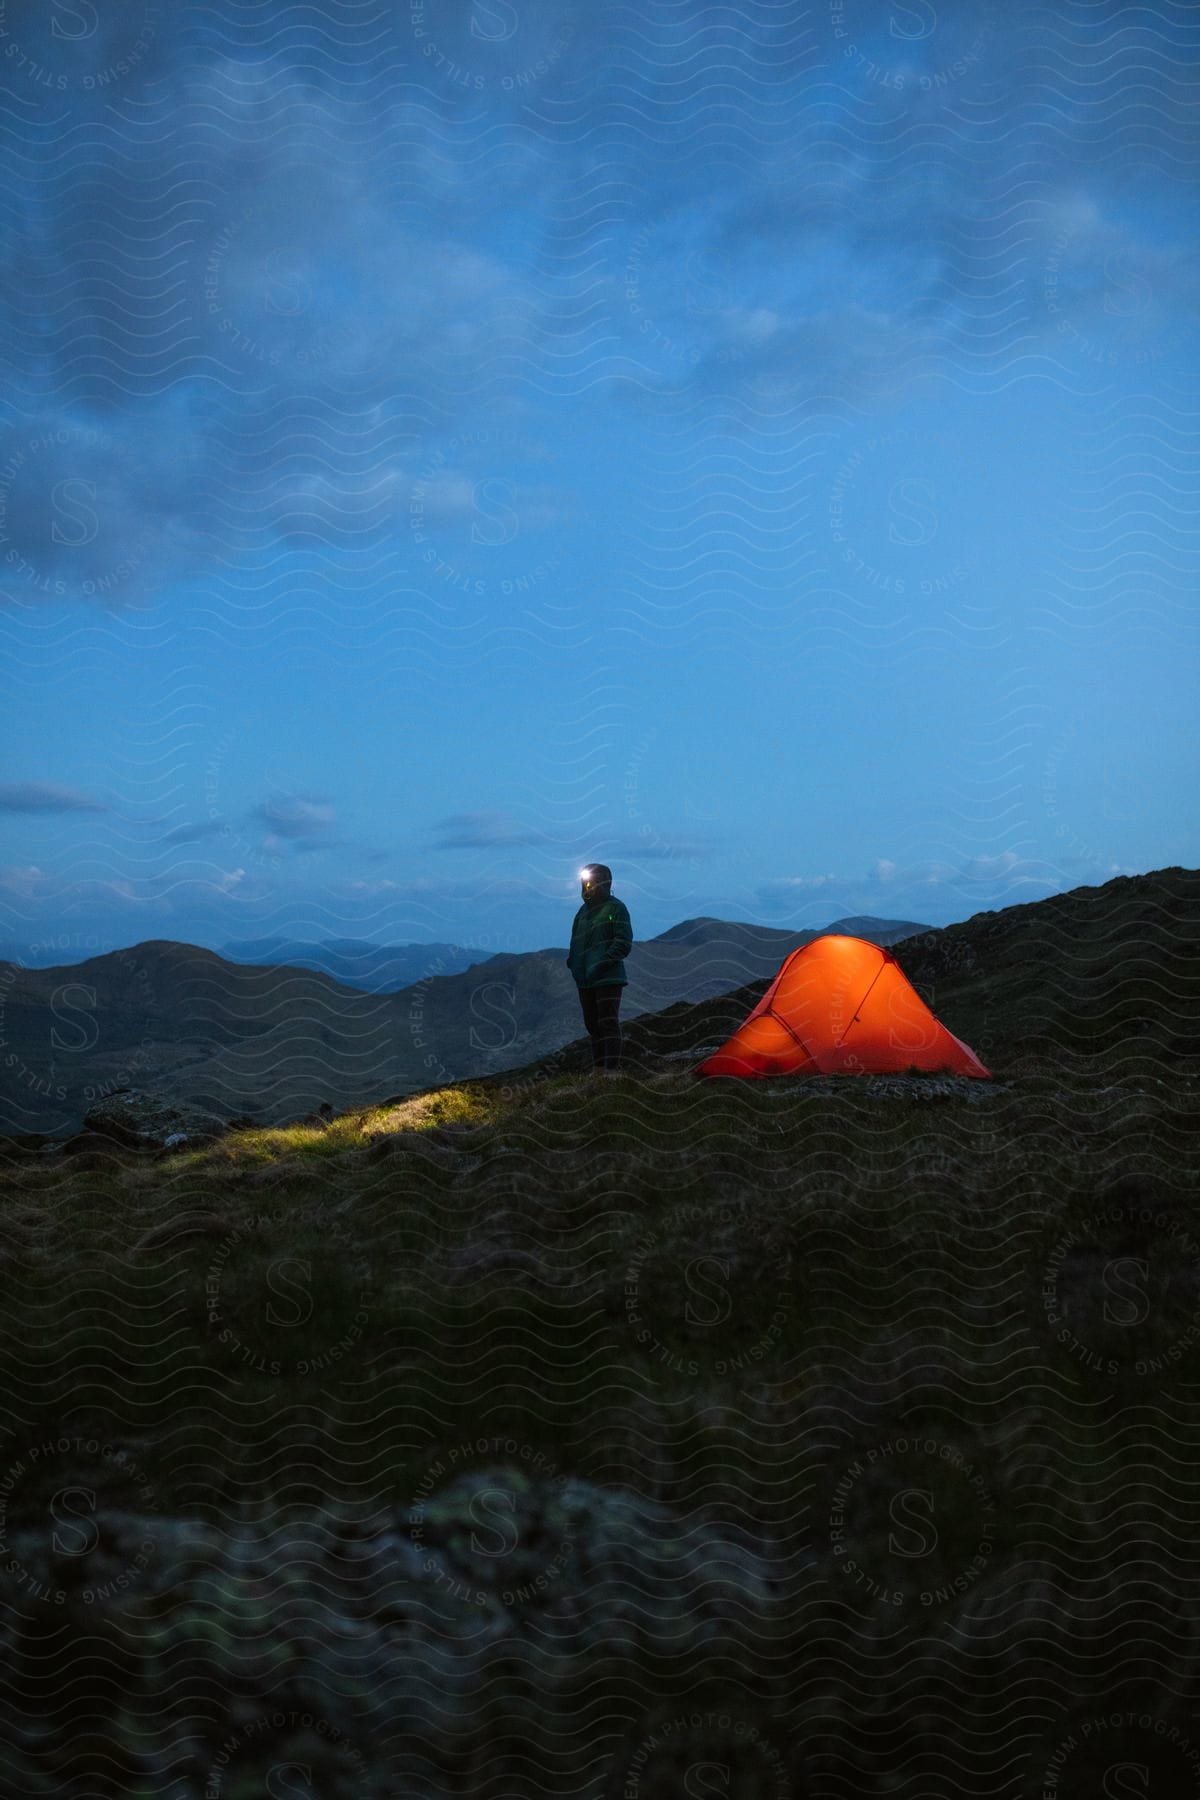 A camper stands by his red tent at night wearing a headlight in a campsite nestled between rocky grassy hills under a cloudy sky